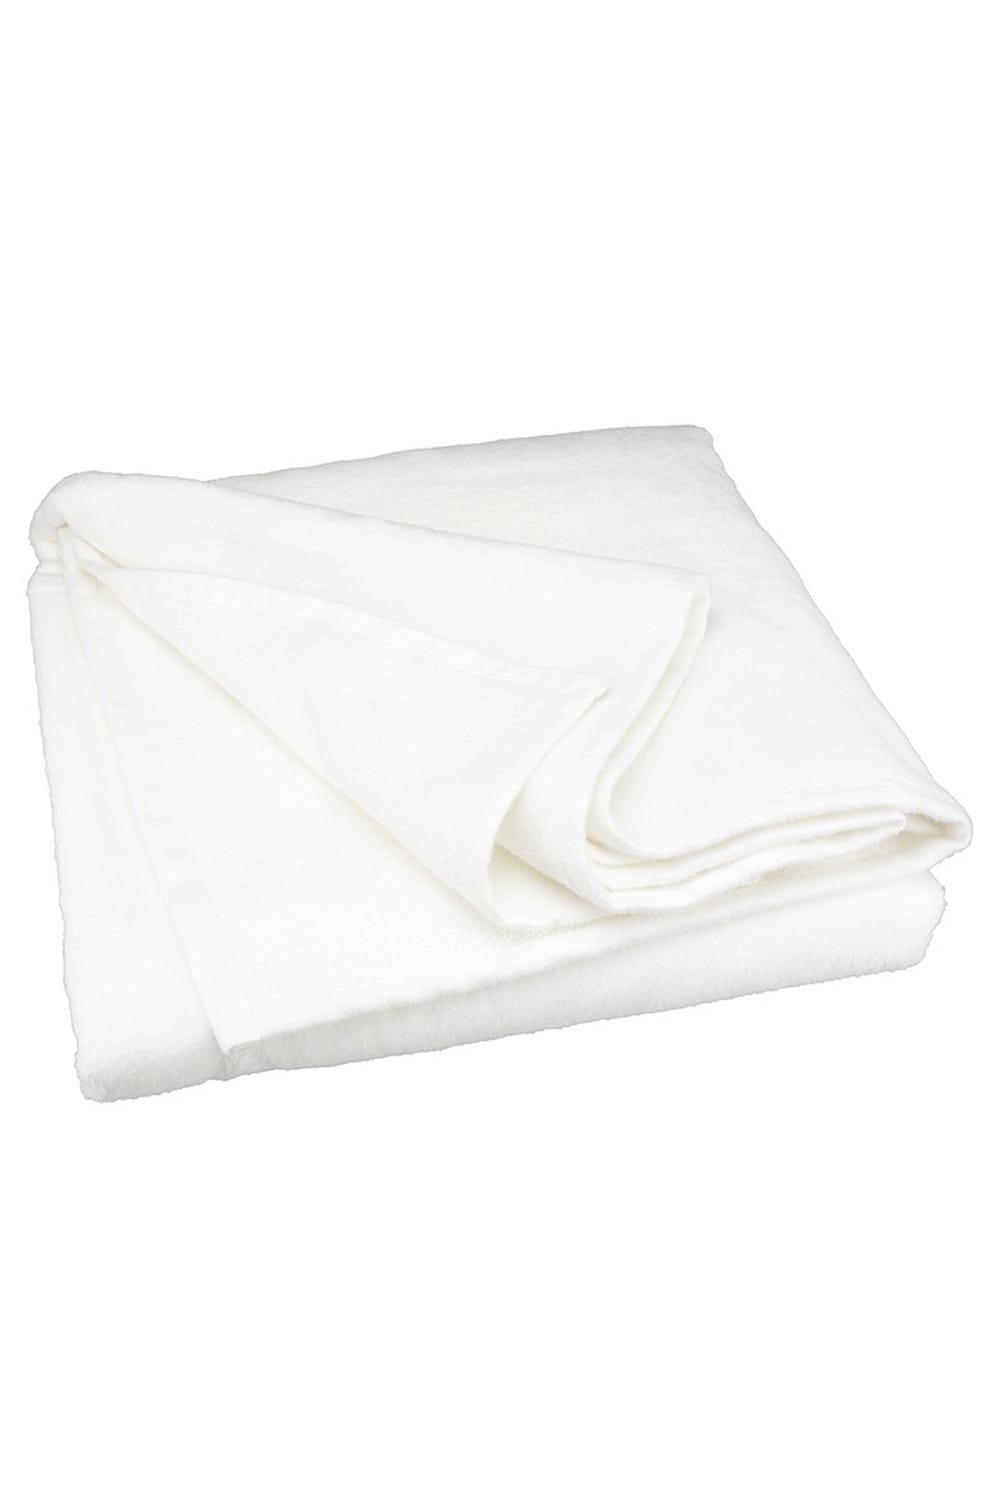 A&R Towels Subli-Me All-over Beach Towel (White) (Guest)